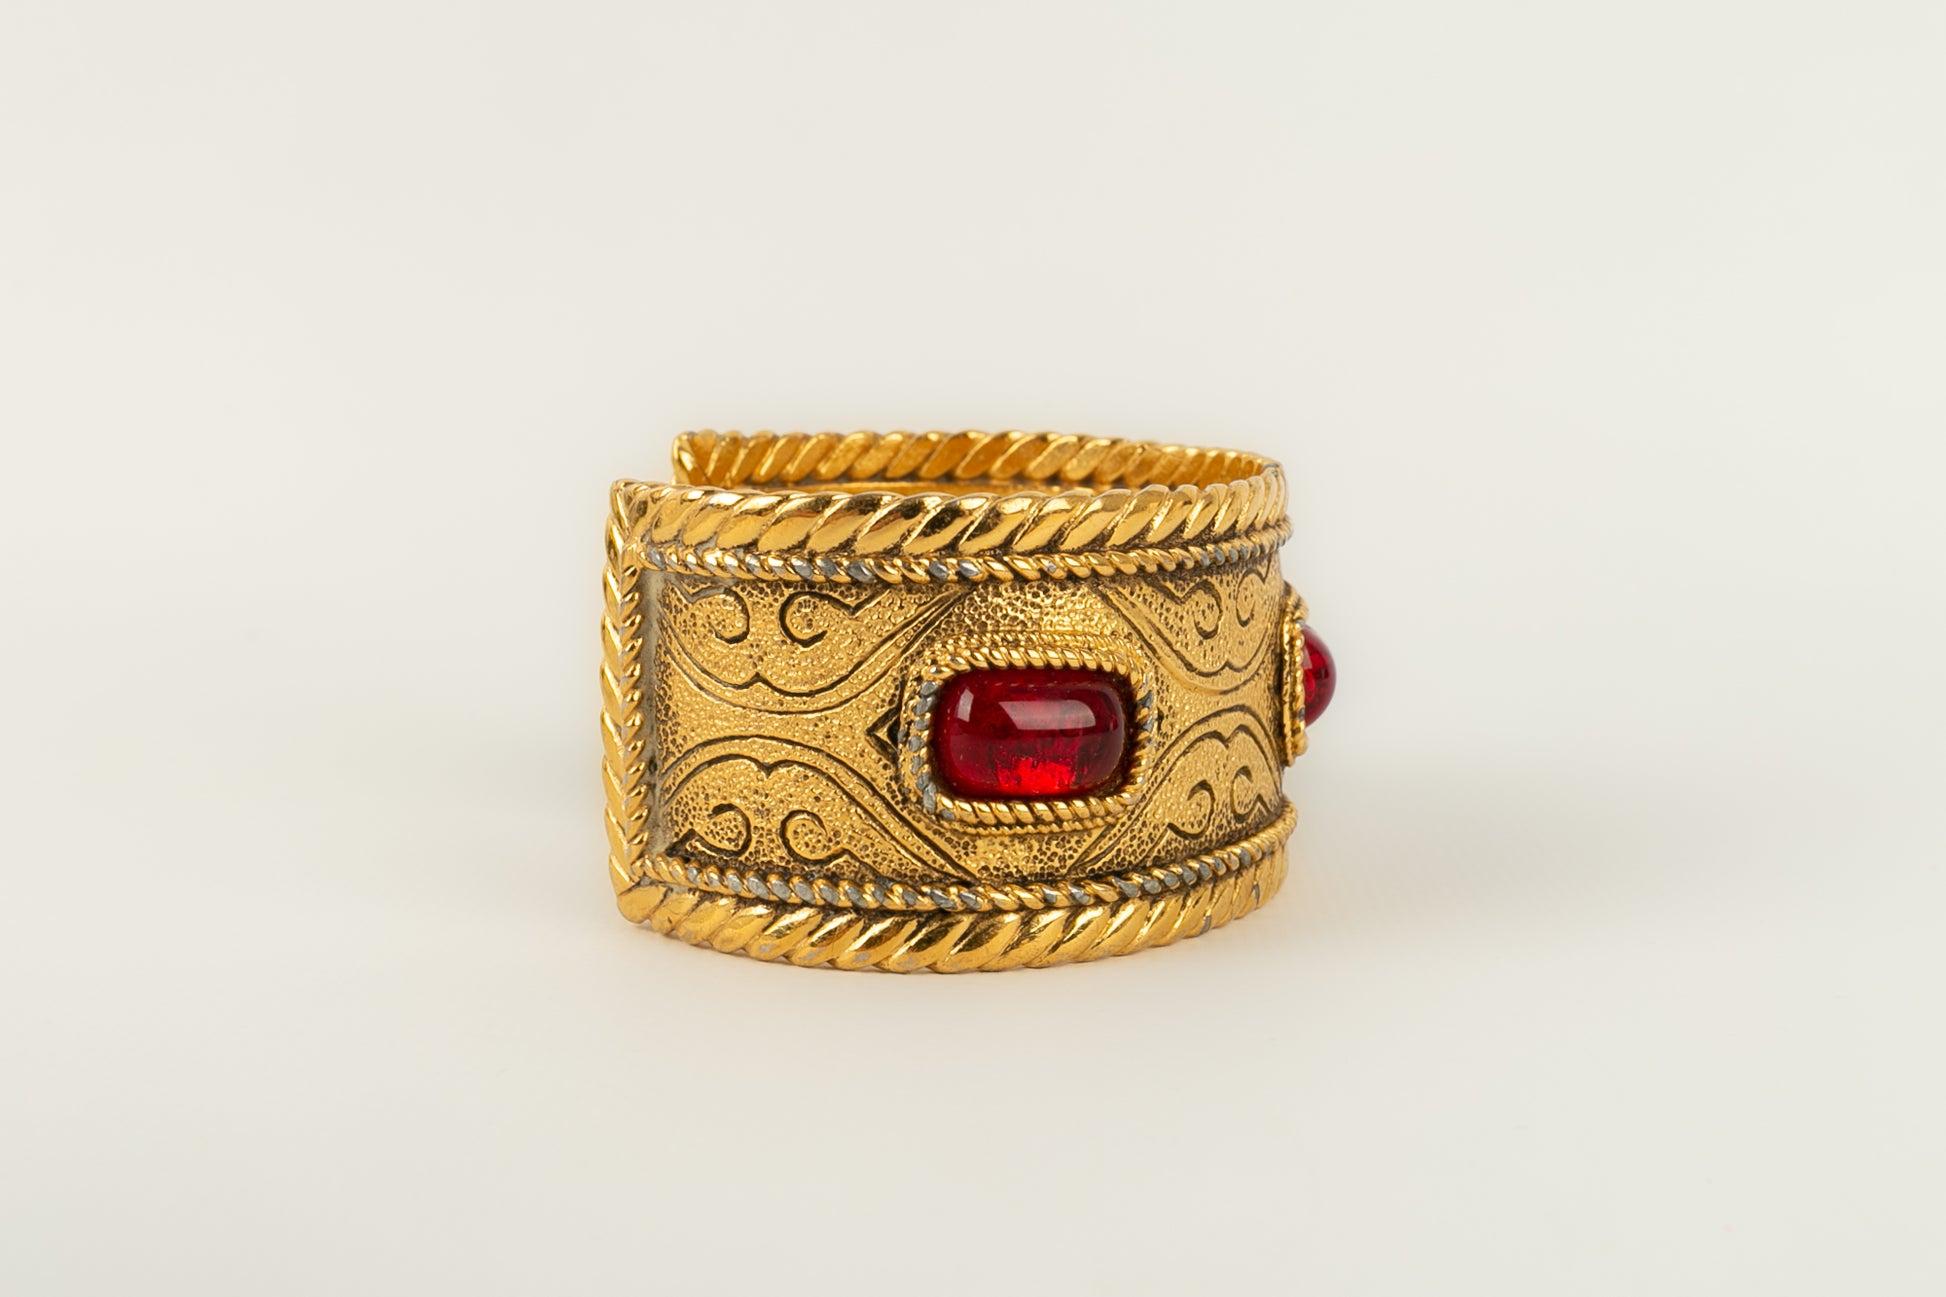 Chanel - Bracelet in golden metal and red glass paste. 1985 Collection.

Additional information:
Condition: Very good condition
Dimensions: Wrist circumference: 14.5 cm - Opening: 3 - Height: 3.5 cm
Period: 20th Century

Seller Reference: BRAB48
